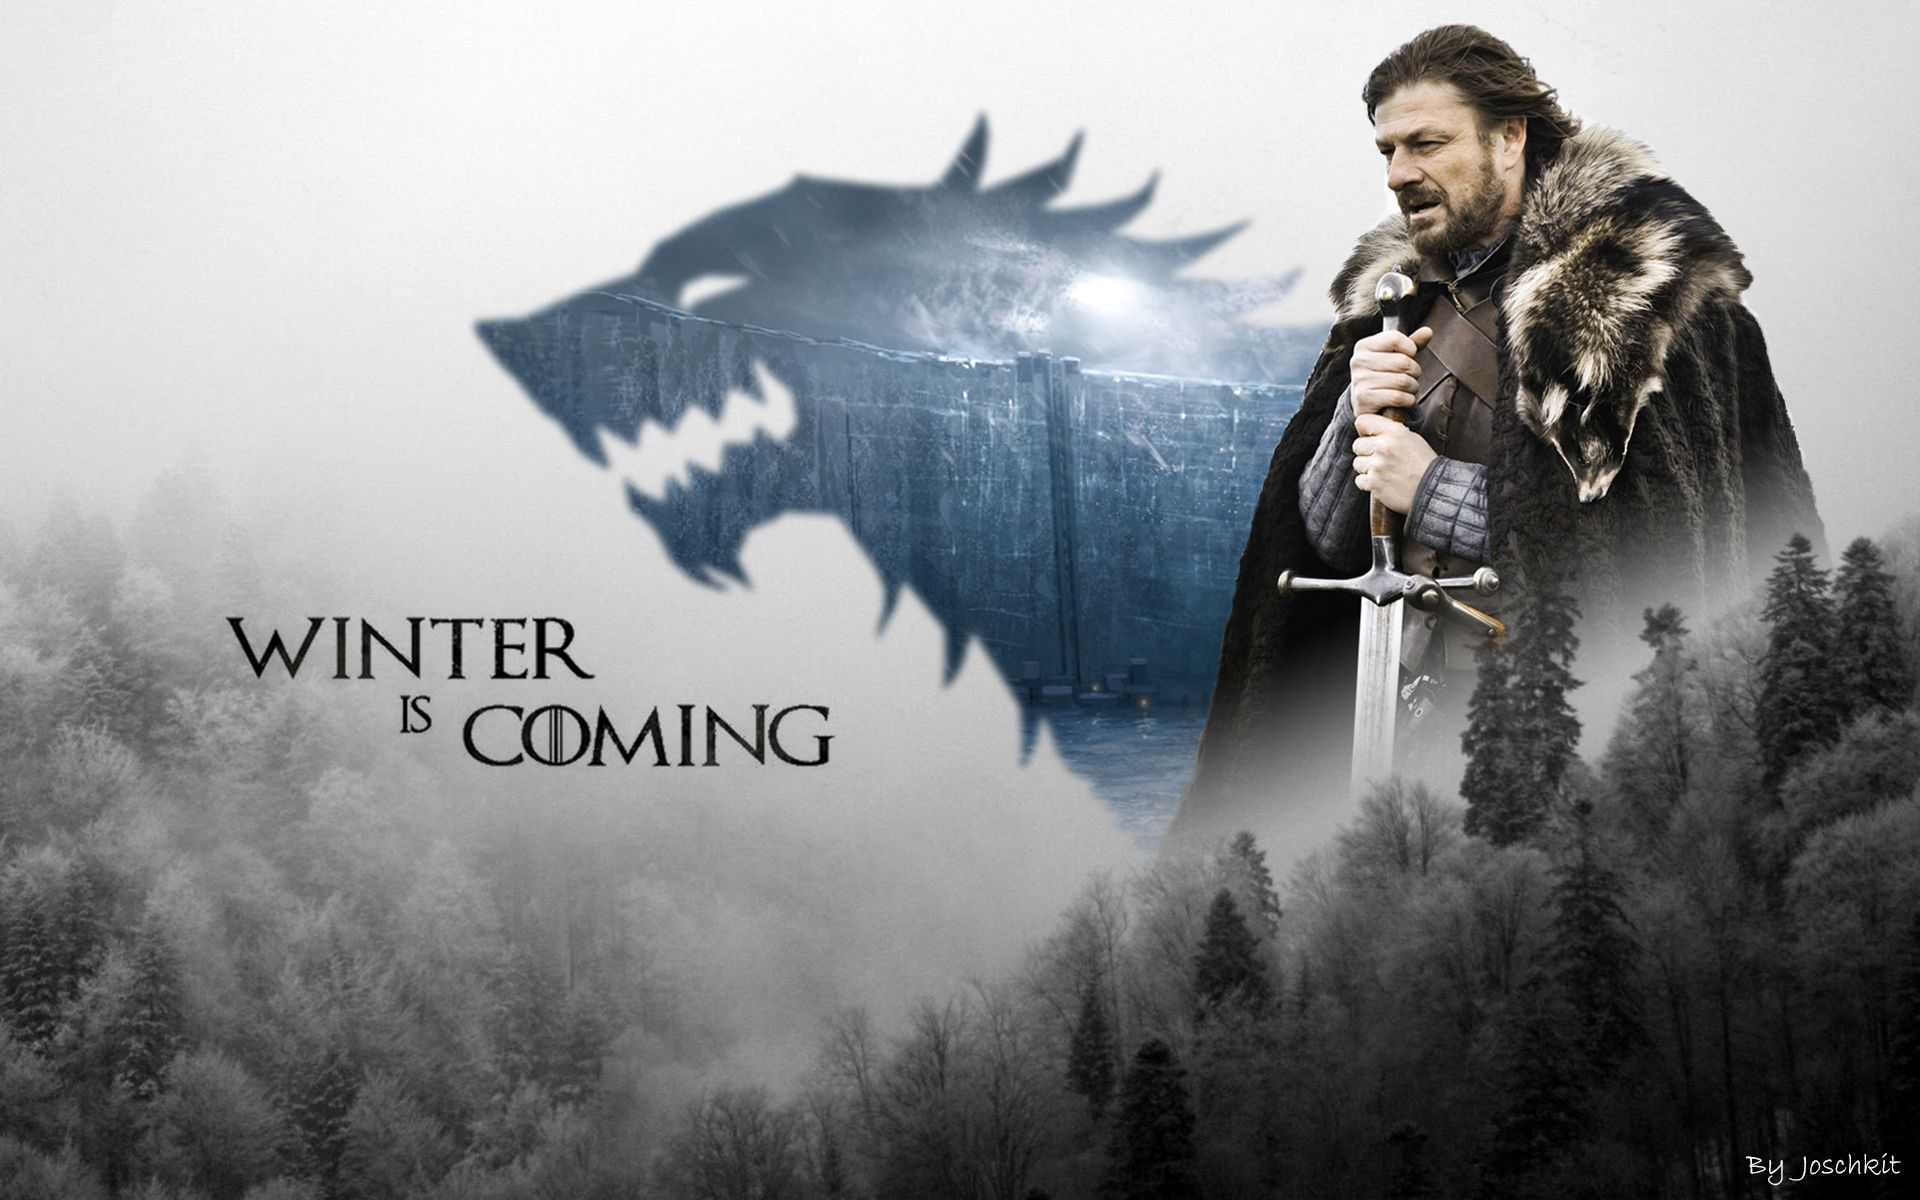 Wallpaper  drawing illustration Game of Thrones House Stark darkness  1920x1080 px computer wallpaper black and white monochrome photography  fictional character geological phenomenon 1920x1080  4kWallpaper  565285   HD Wallpapers  WallHere